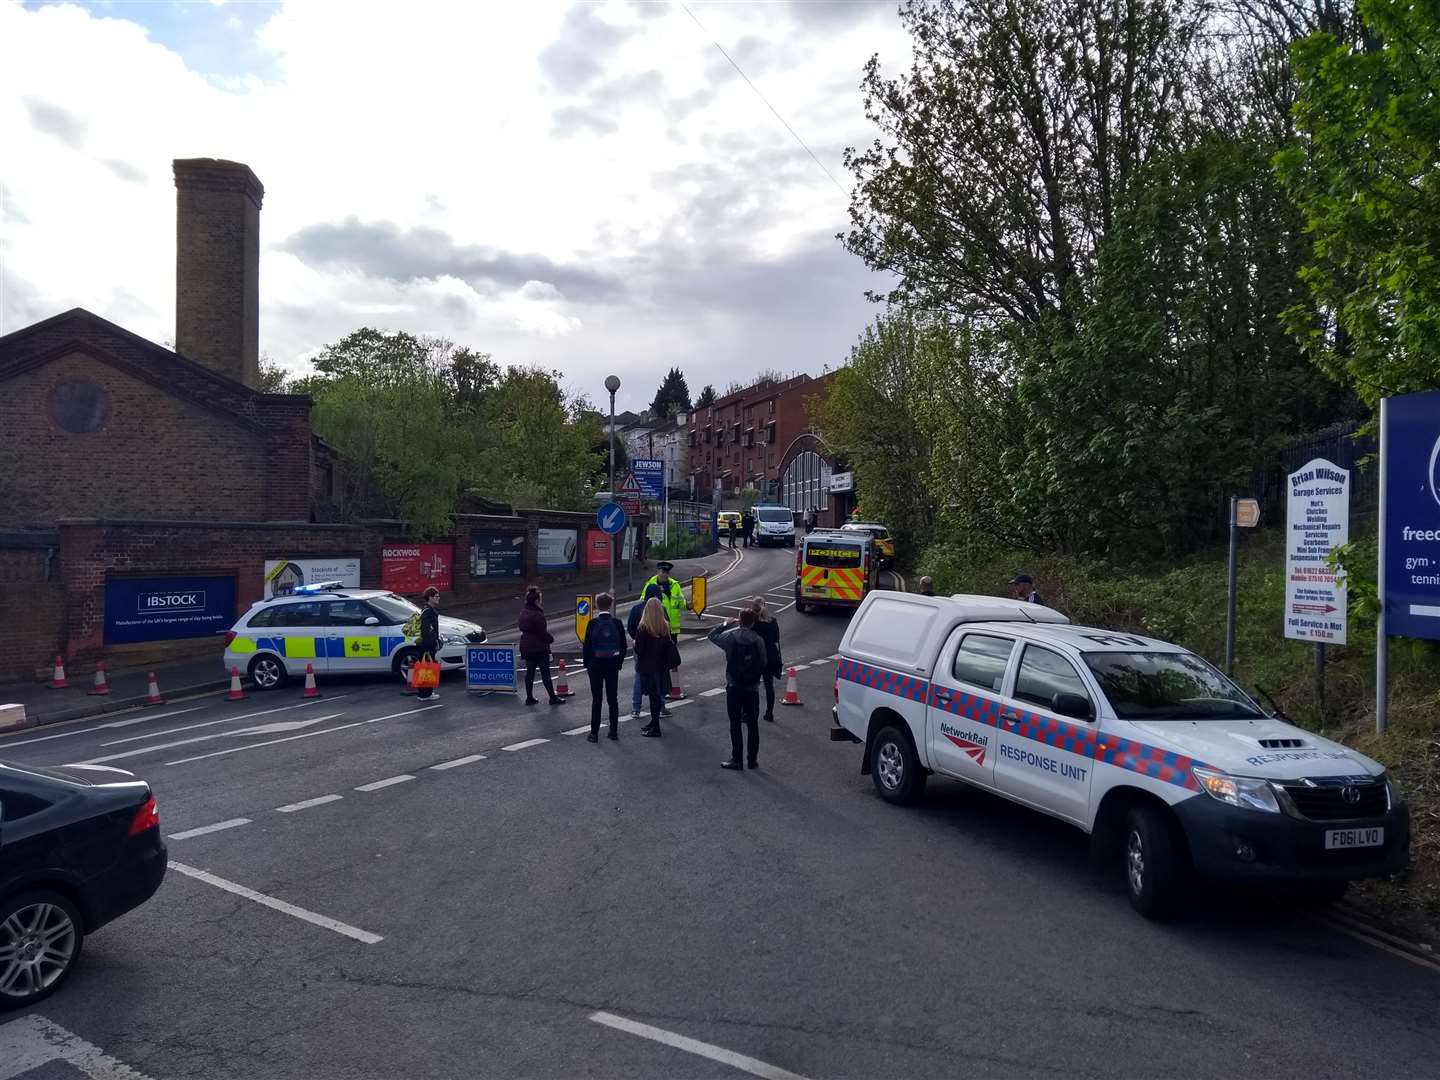 Police at the scene of an 'incident' near Maidstone Barracks station